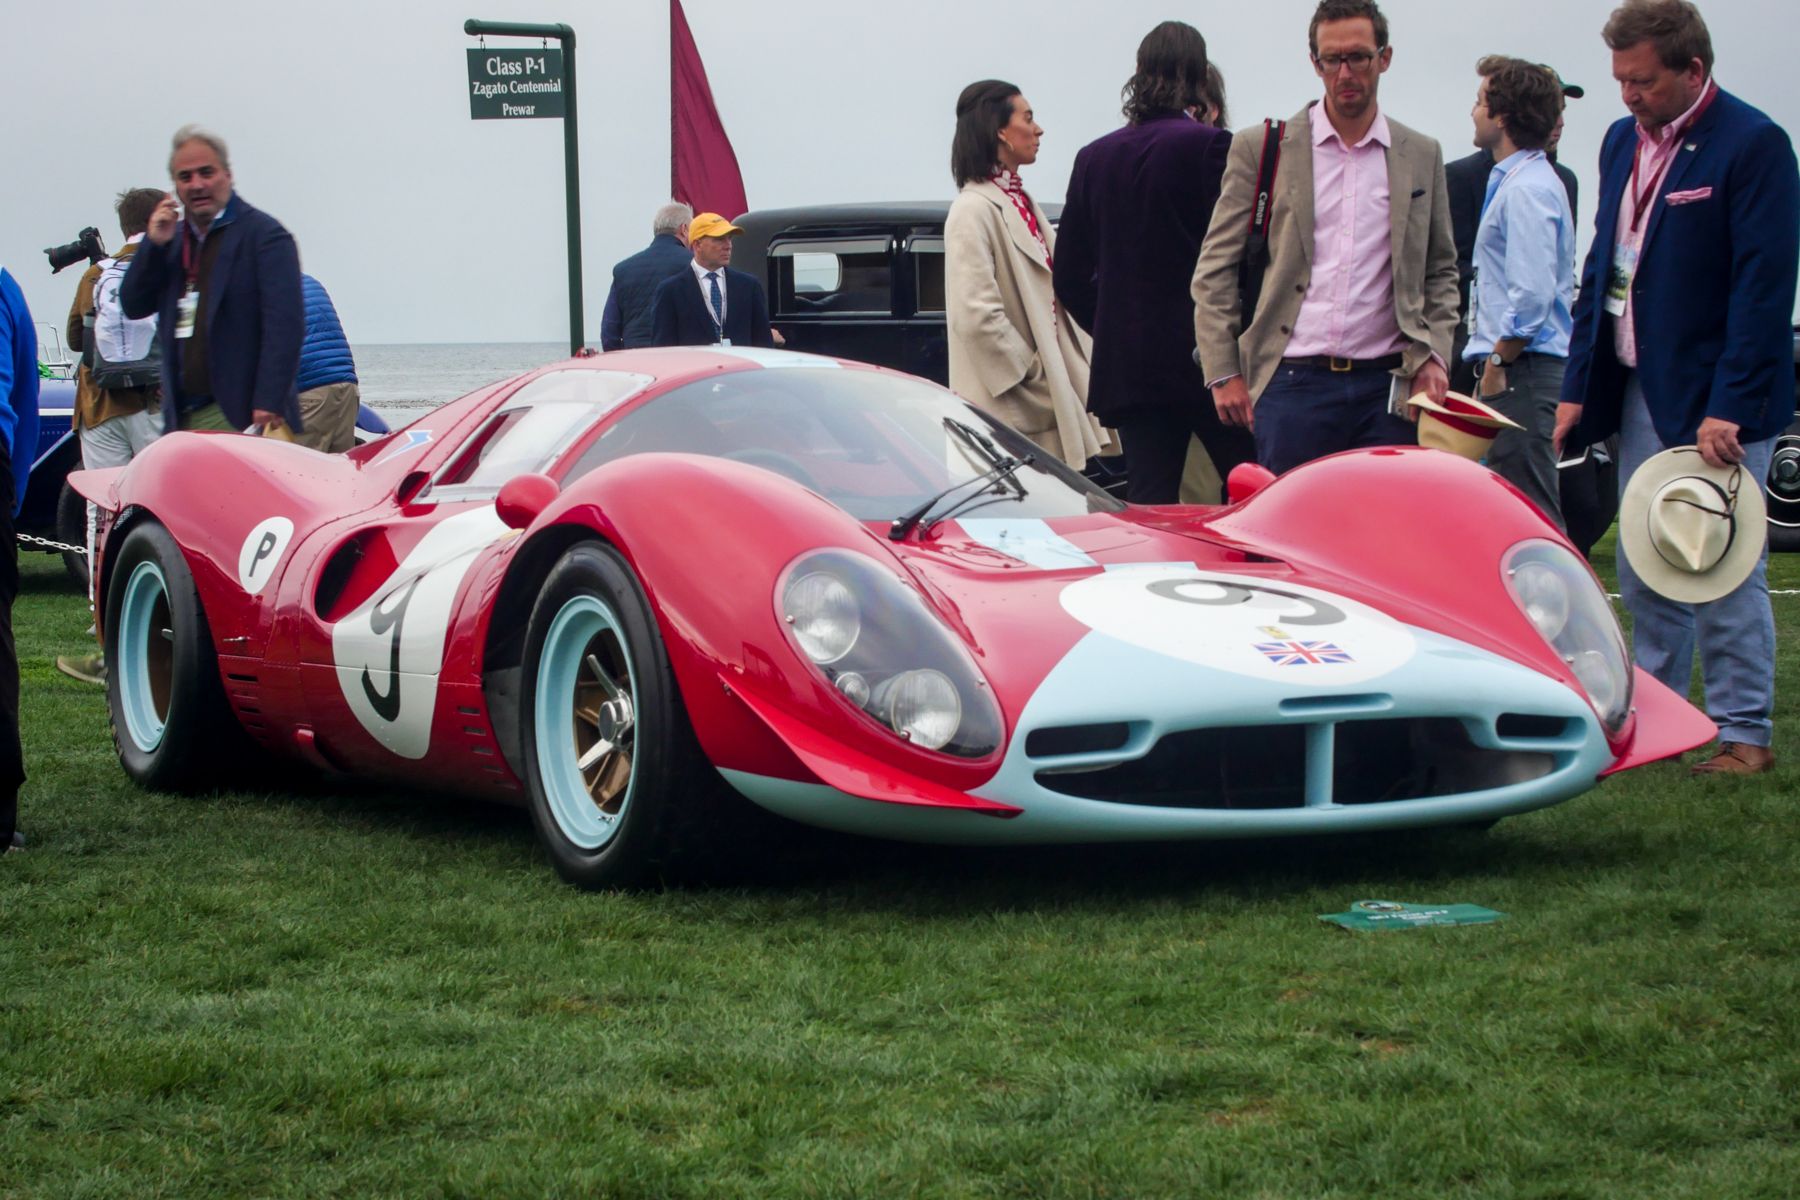 What's so special about a Ferrari, anyway? - The Verge